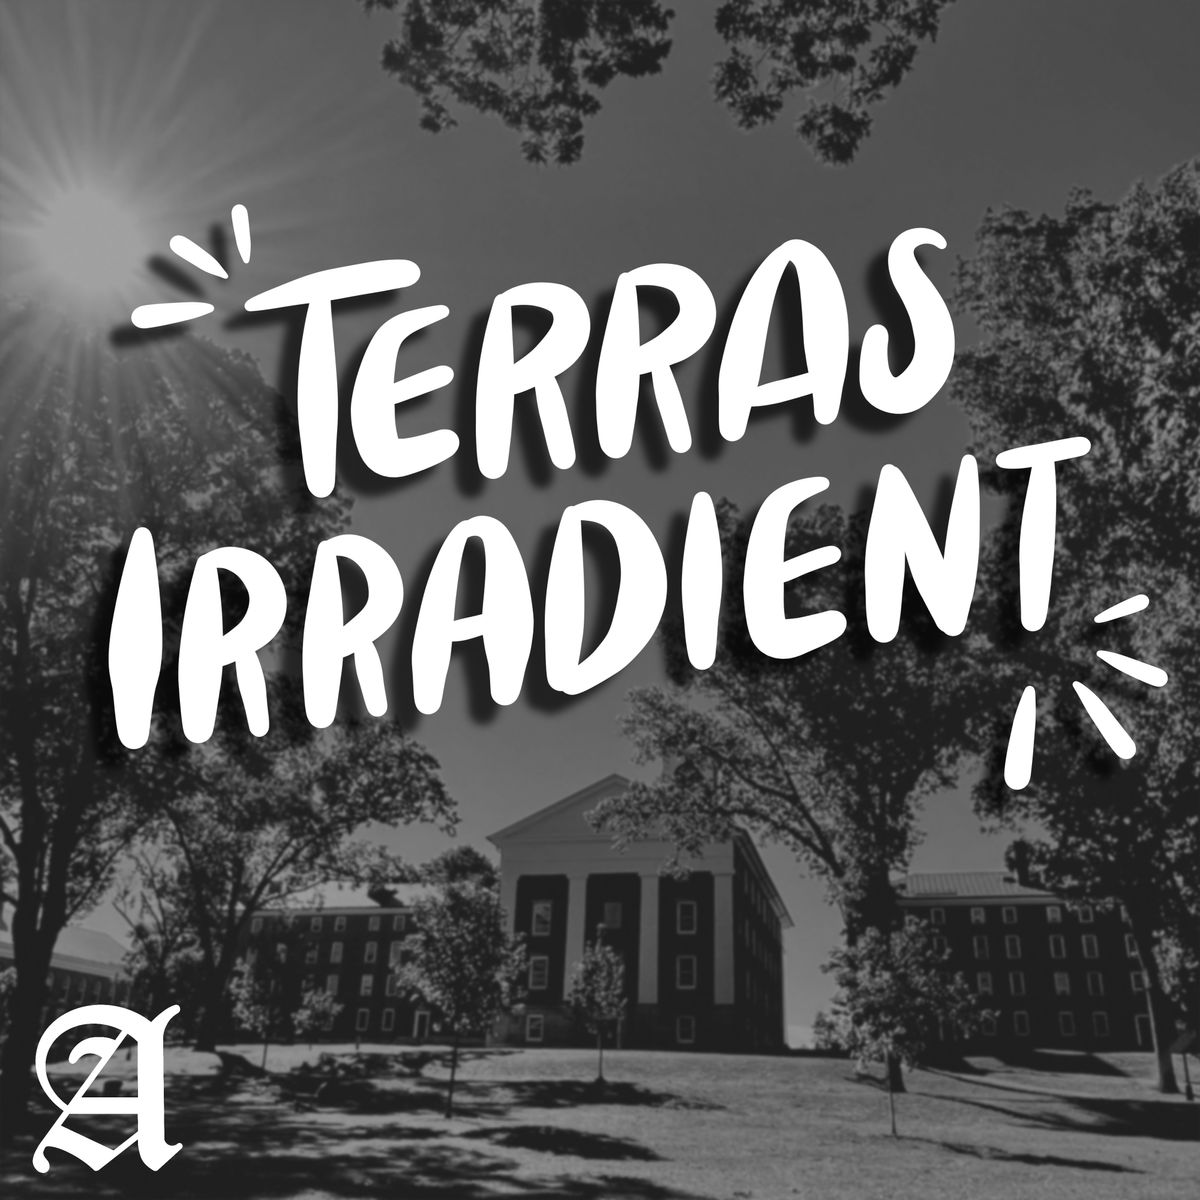 Terras Irradient: Campus Life After Covid-19